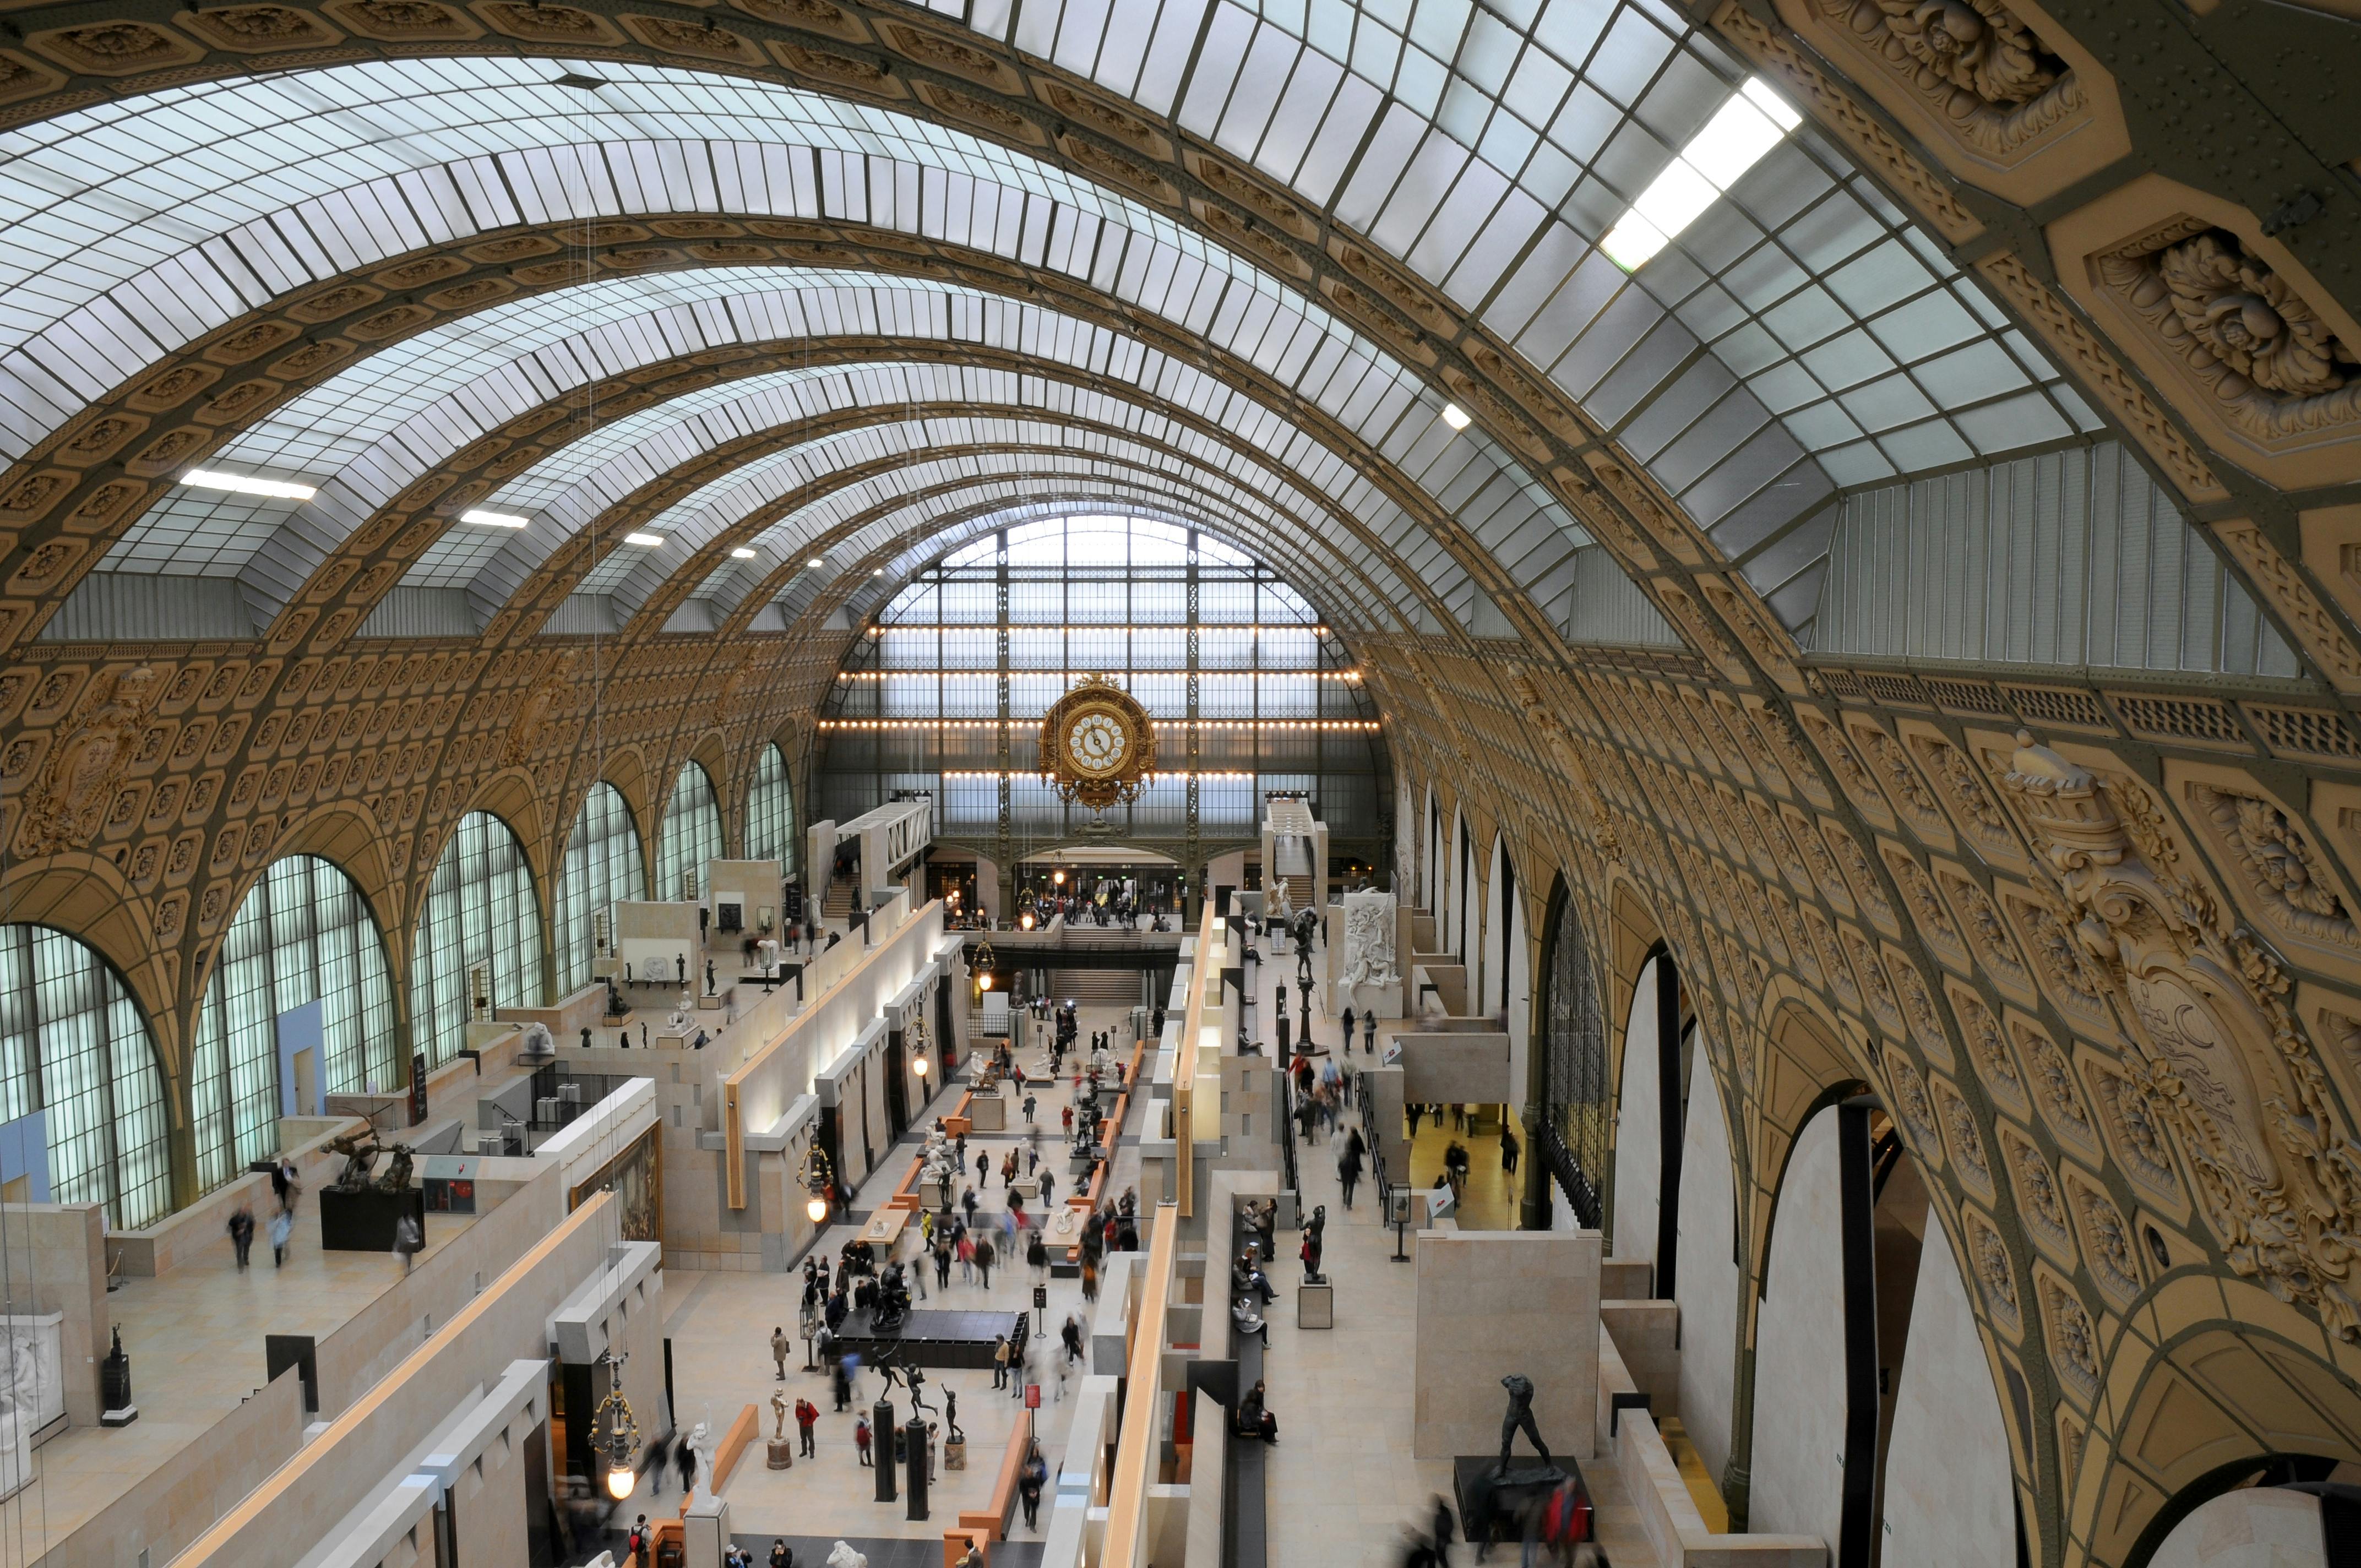 Musée d’Orsay small-group tour with local expert guide